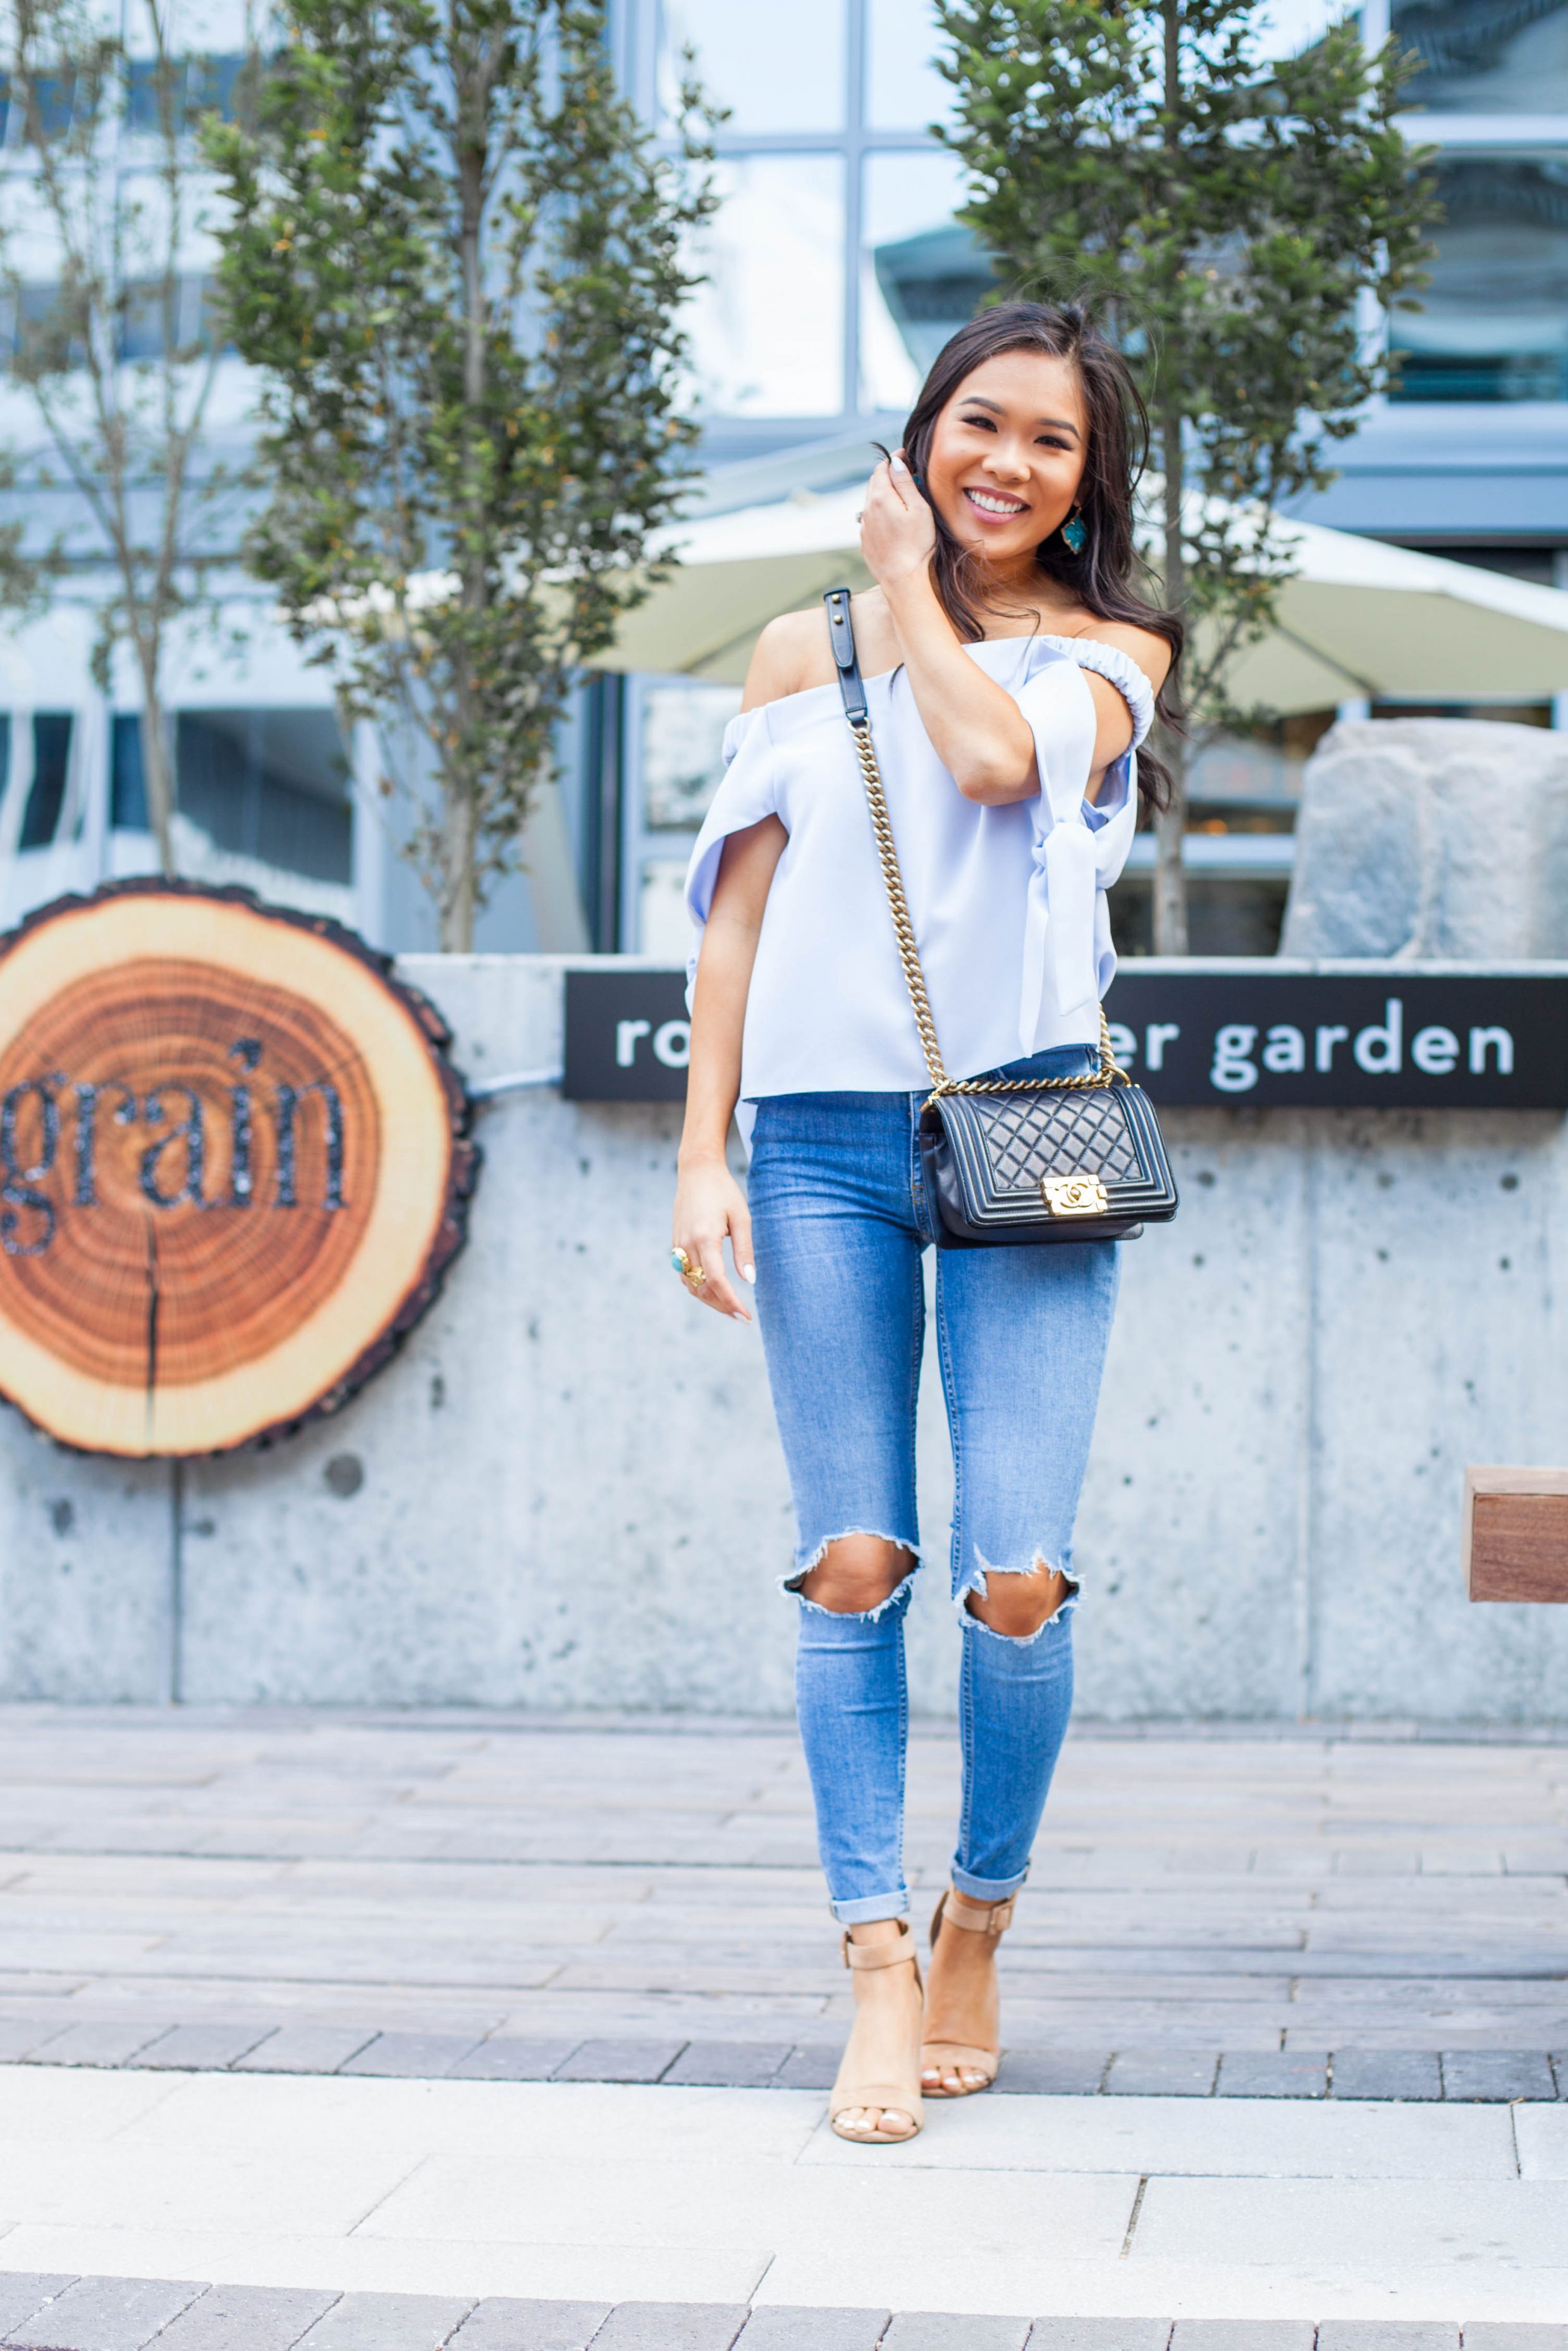 COLOR & CHIC | Off the shoulder top with tie sleeves, distressed jeans and Chanel boy bag